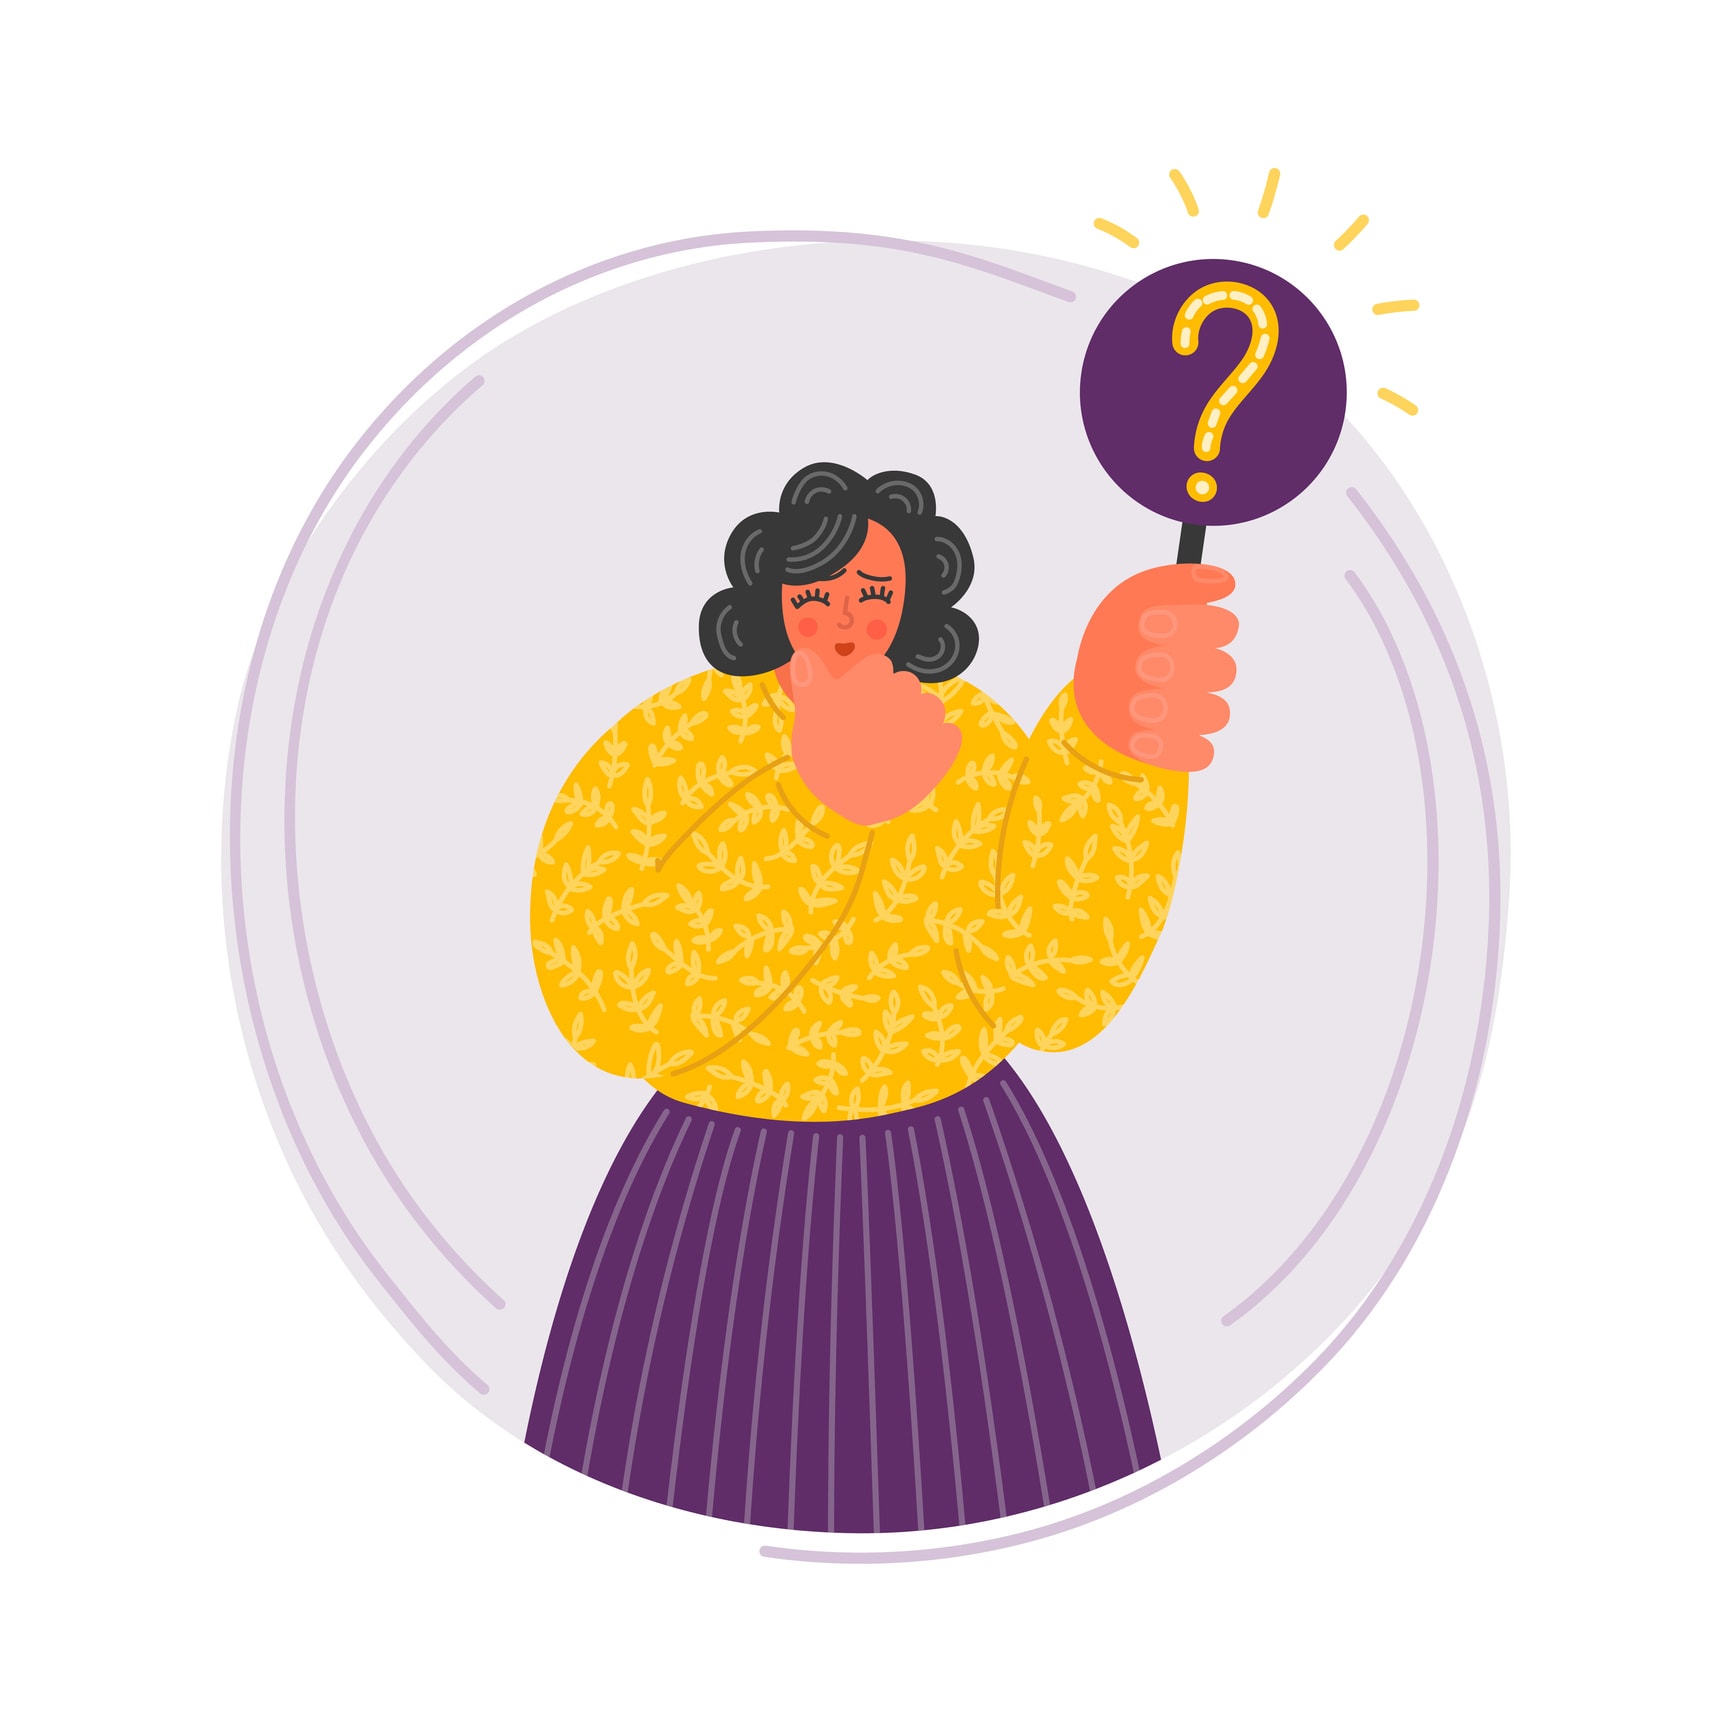 Woman holding question mark